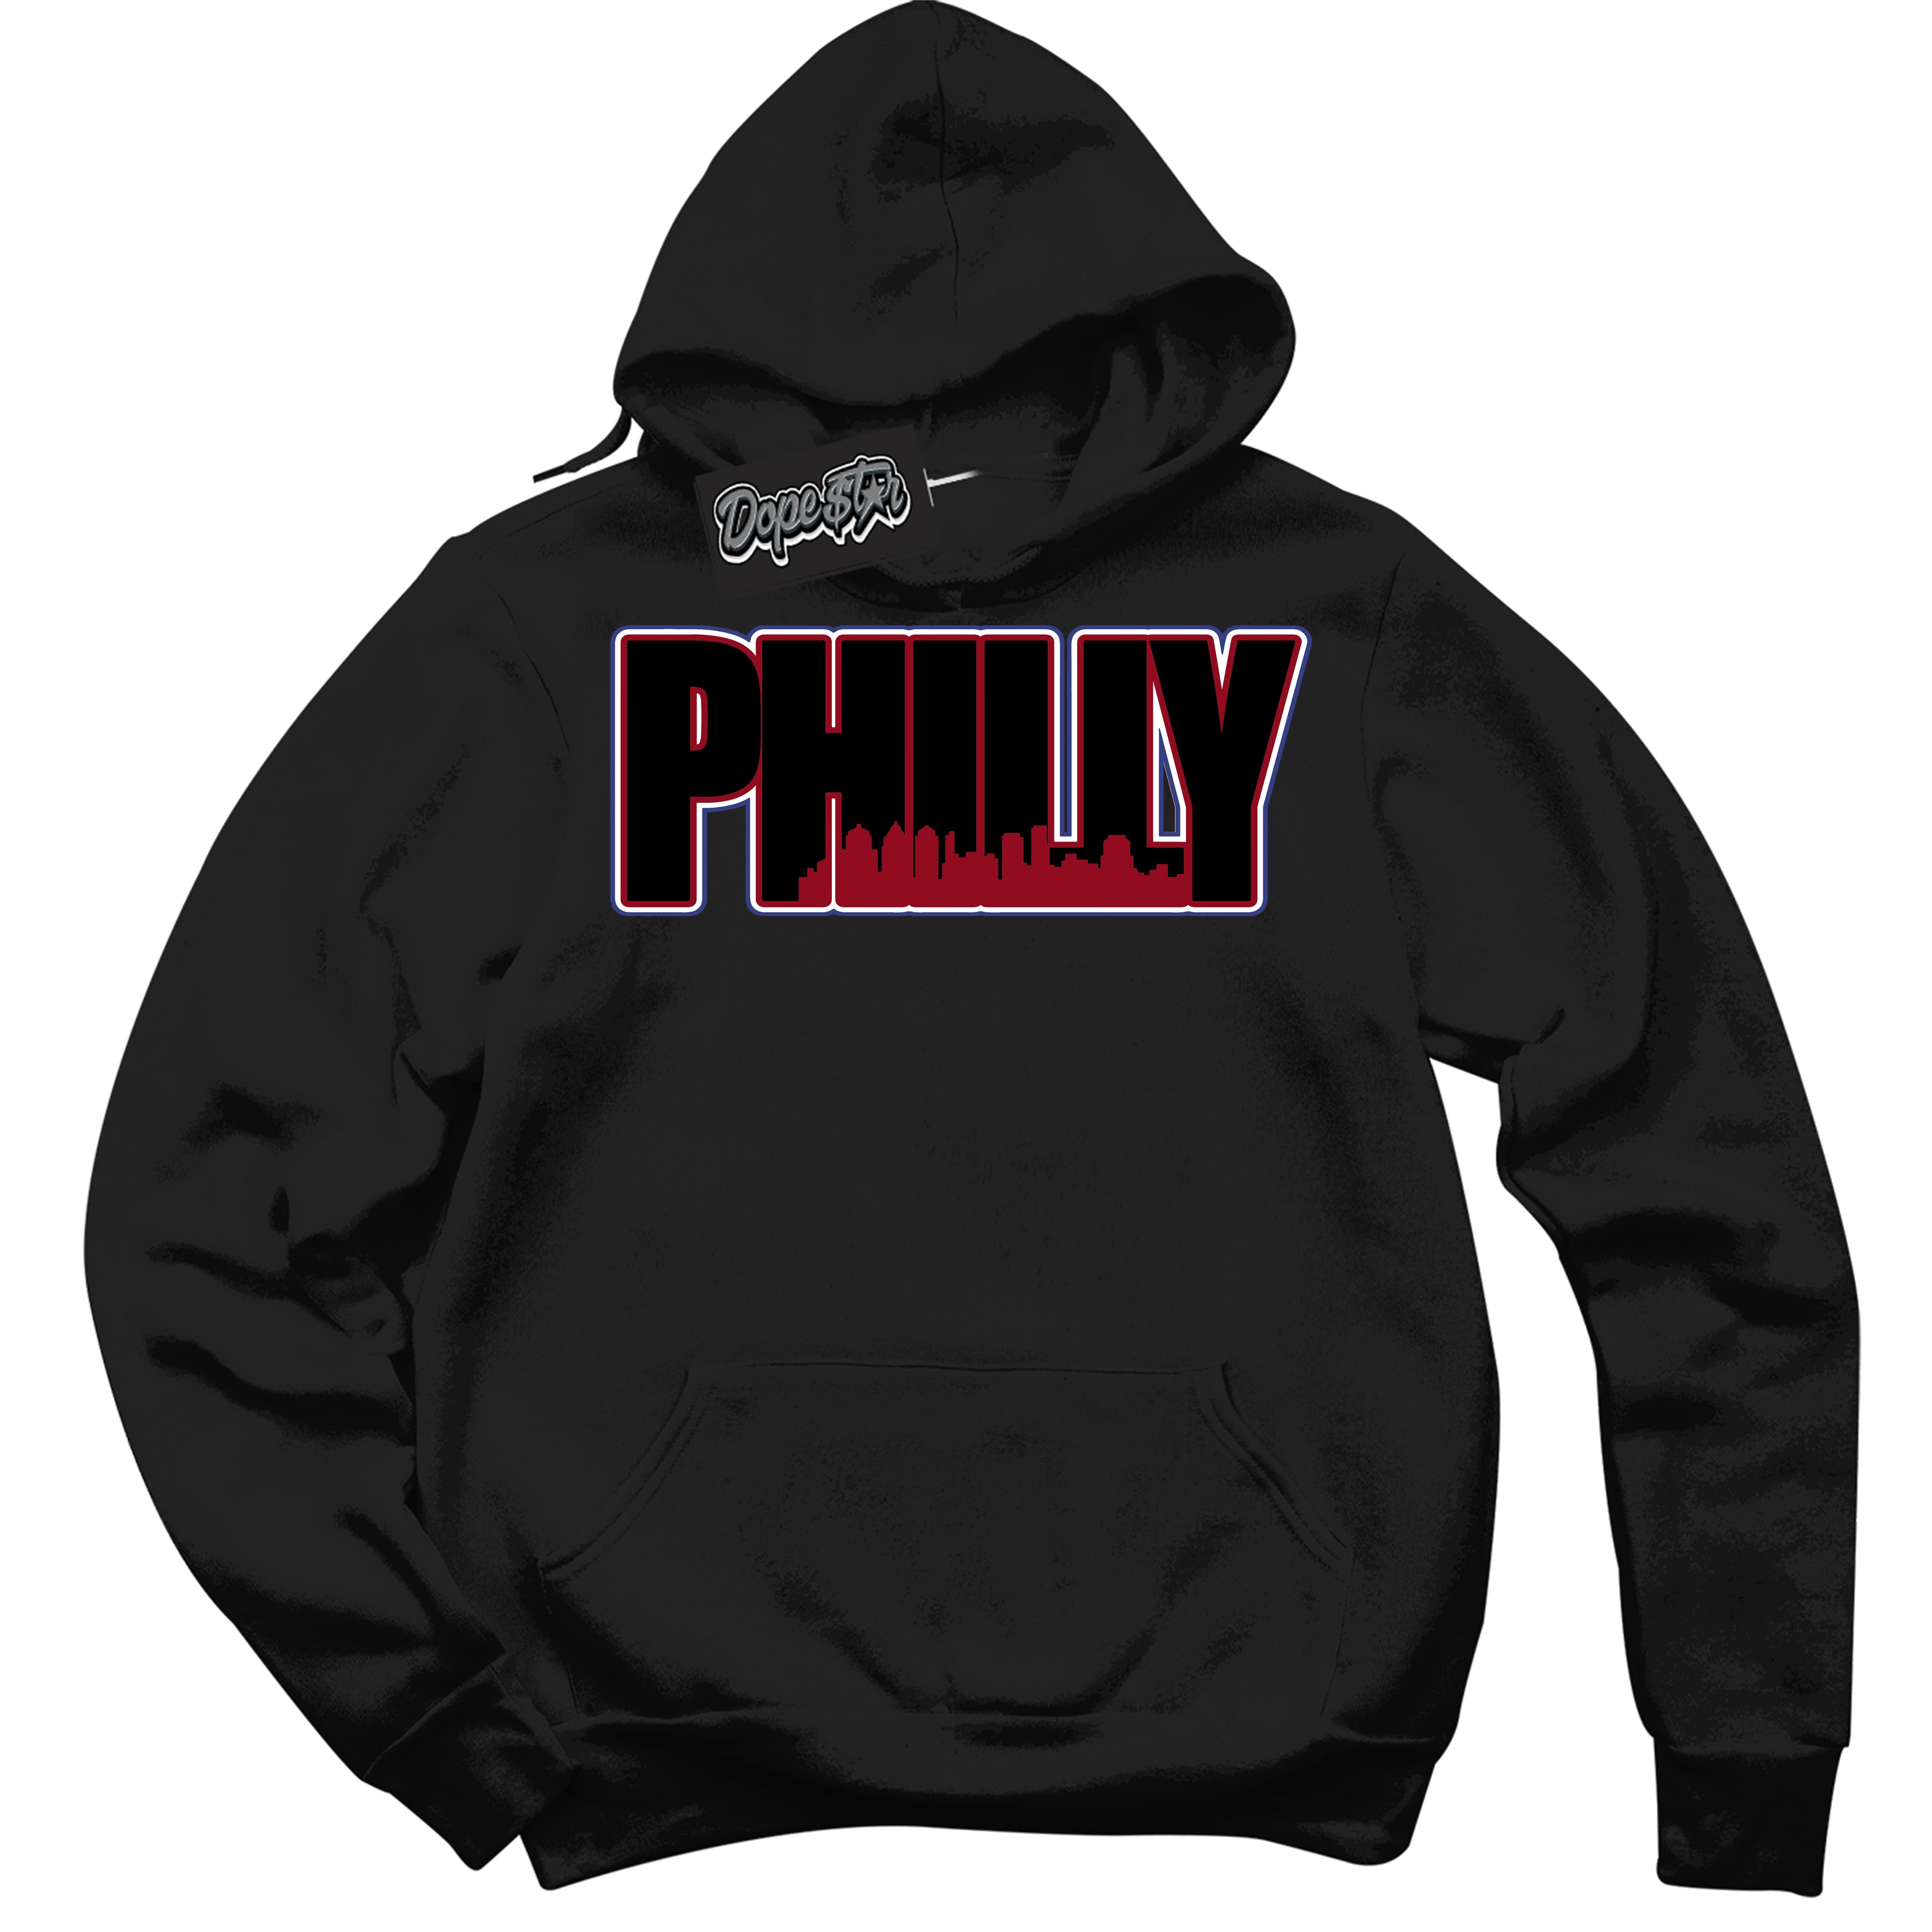 Cool Black Hoodie with “ Philly ”  design that Perfectly Matches Playoffs 8s Sneakers.